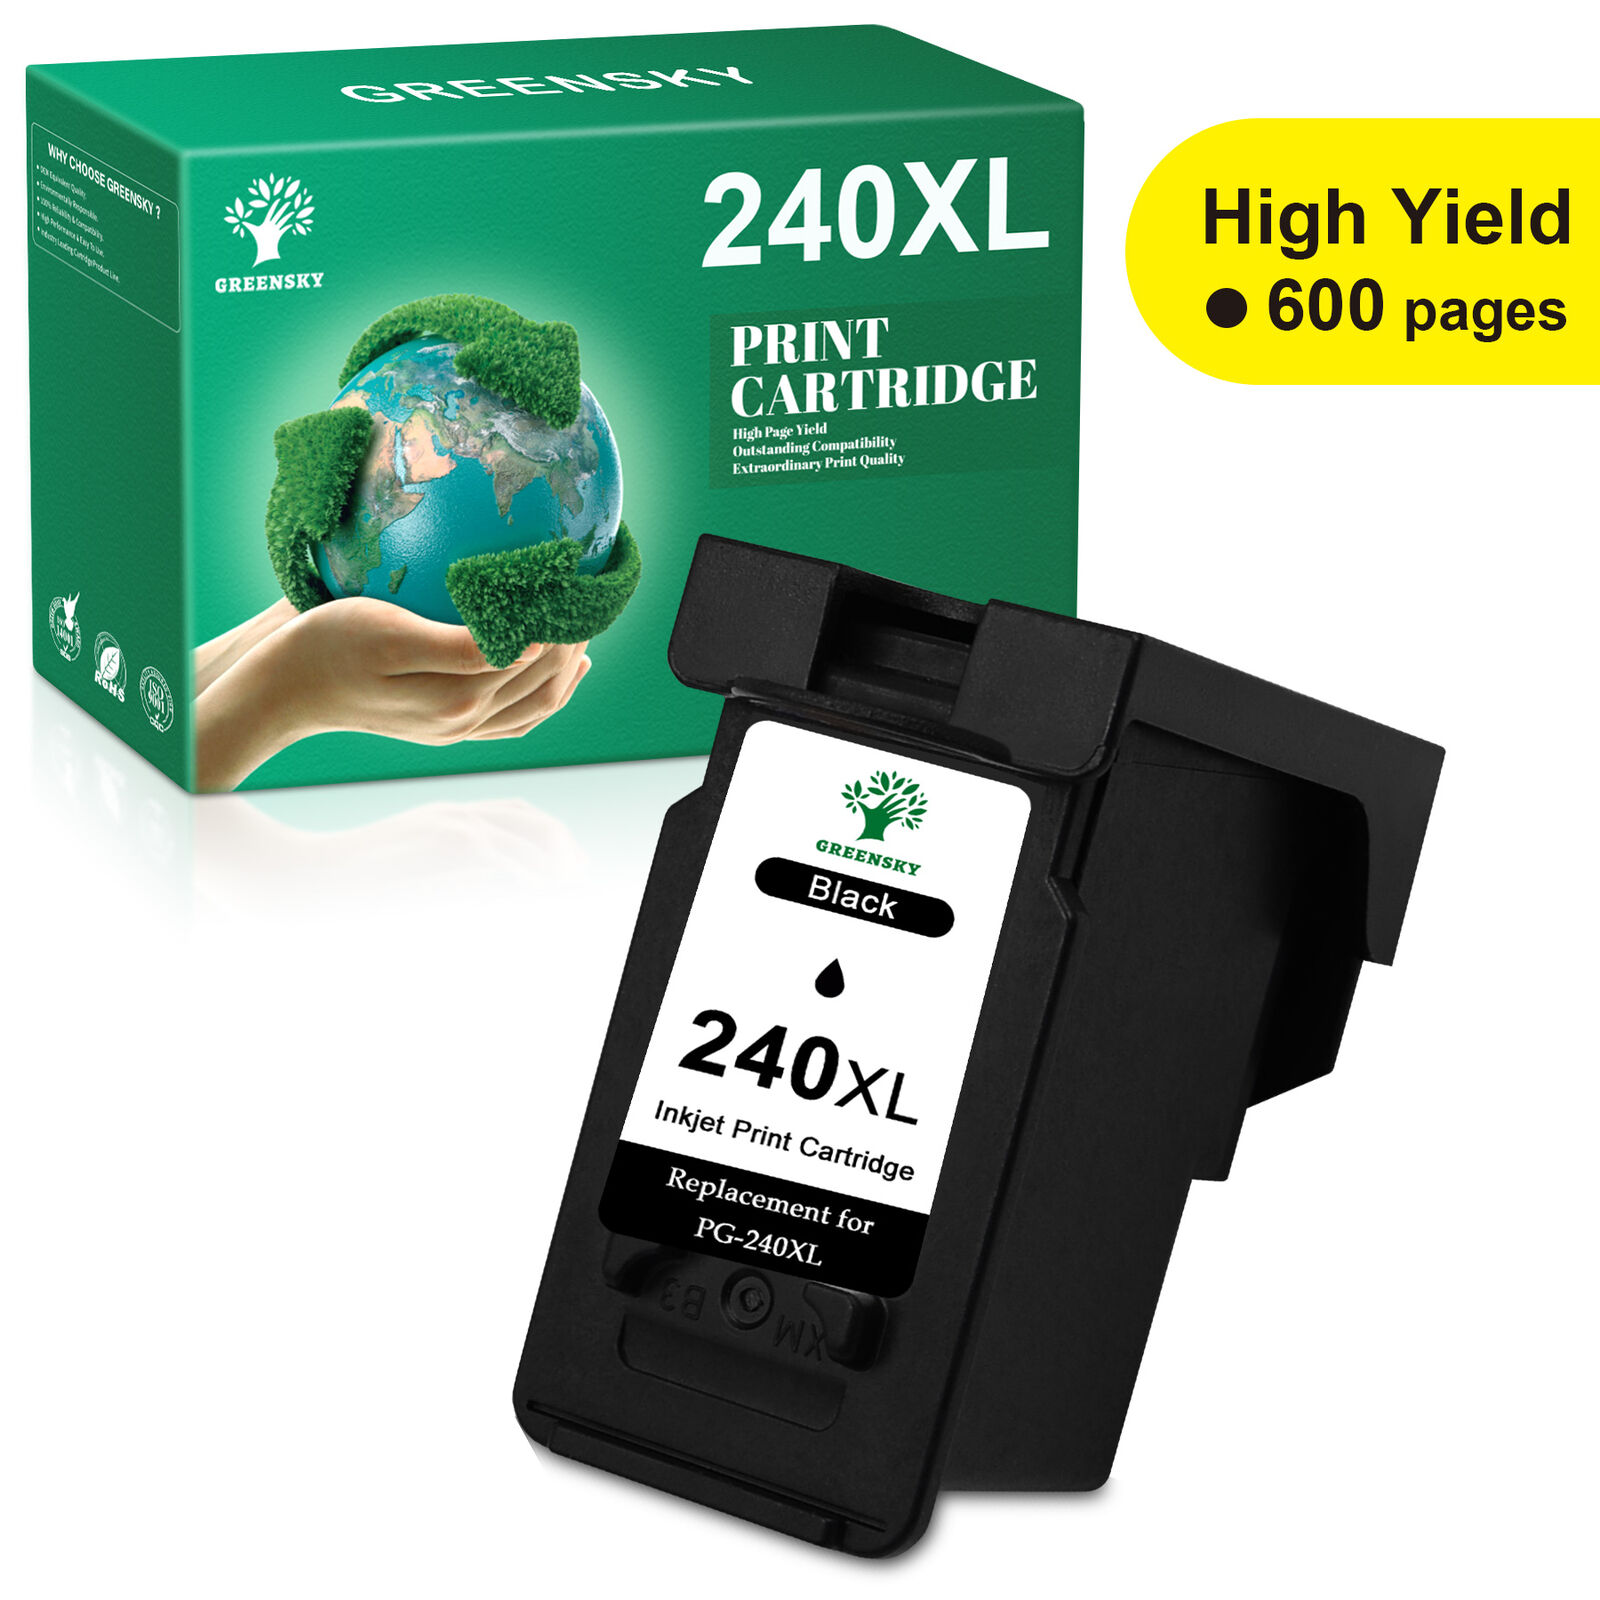 Ink Replacement for Canon PG-240XL CL-241XL PIXMA MG3520 MG3220 MG3620 MX392 lot